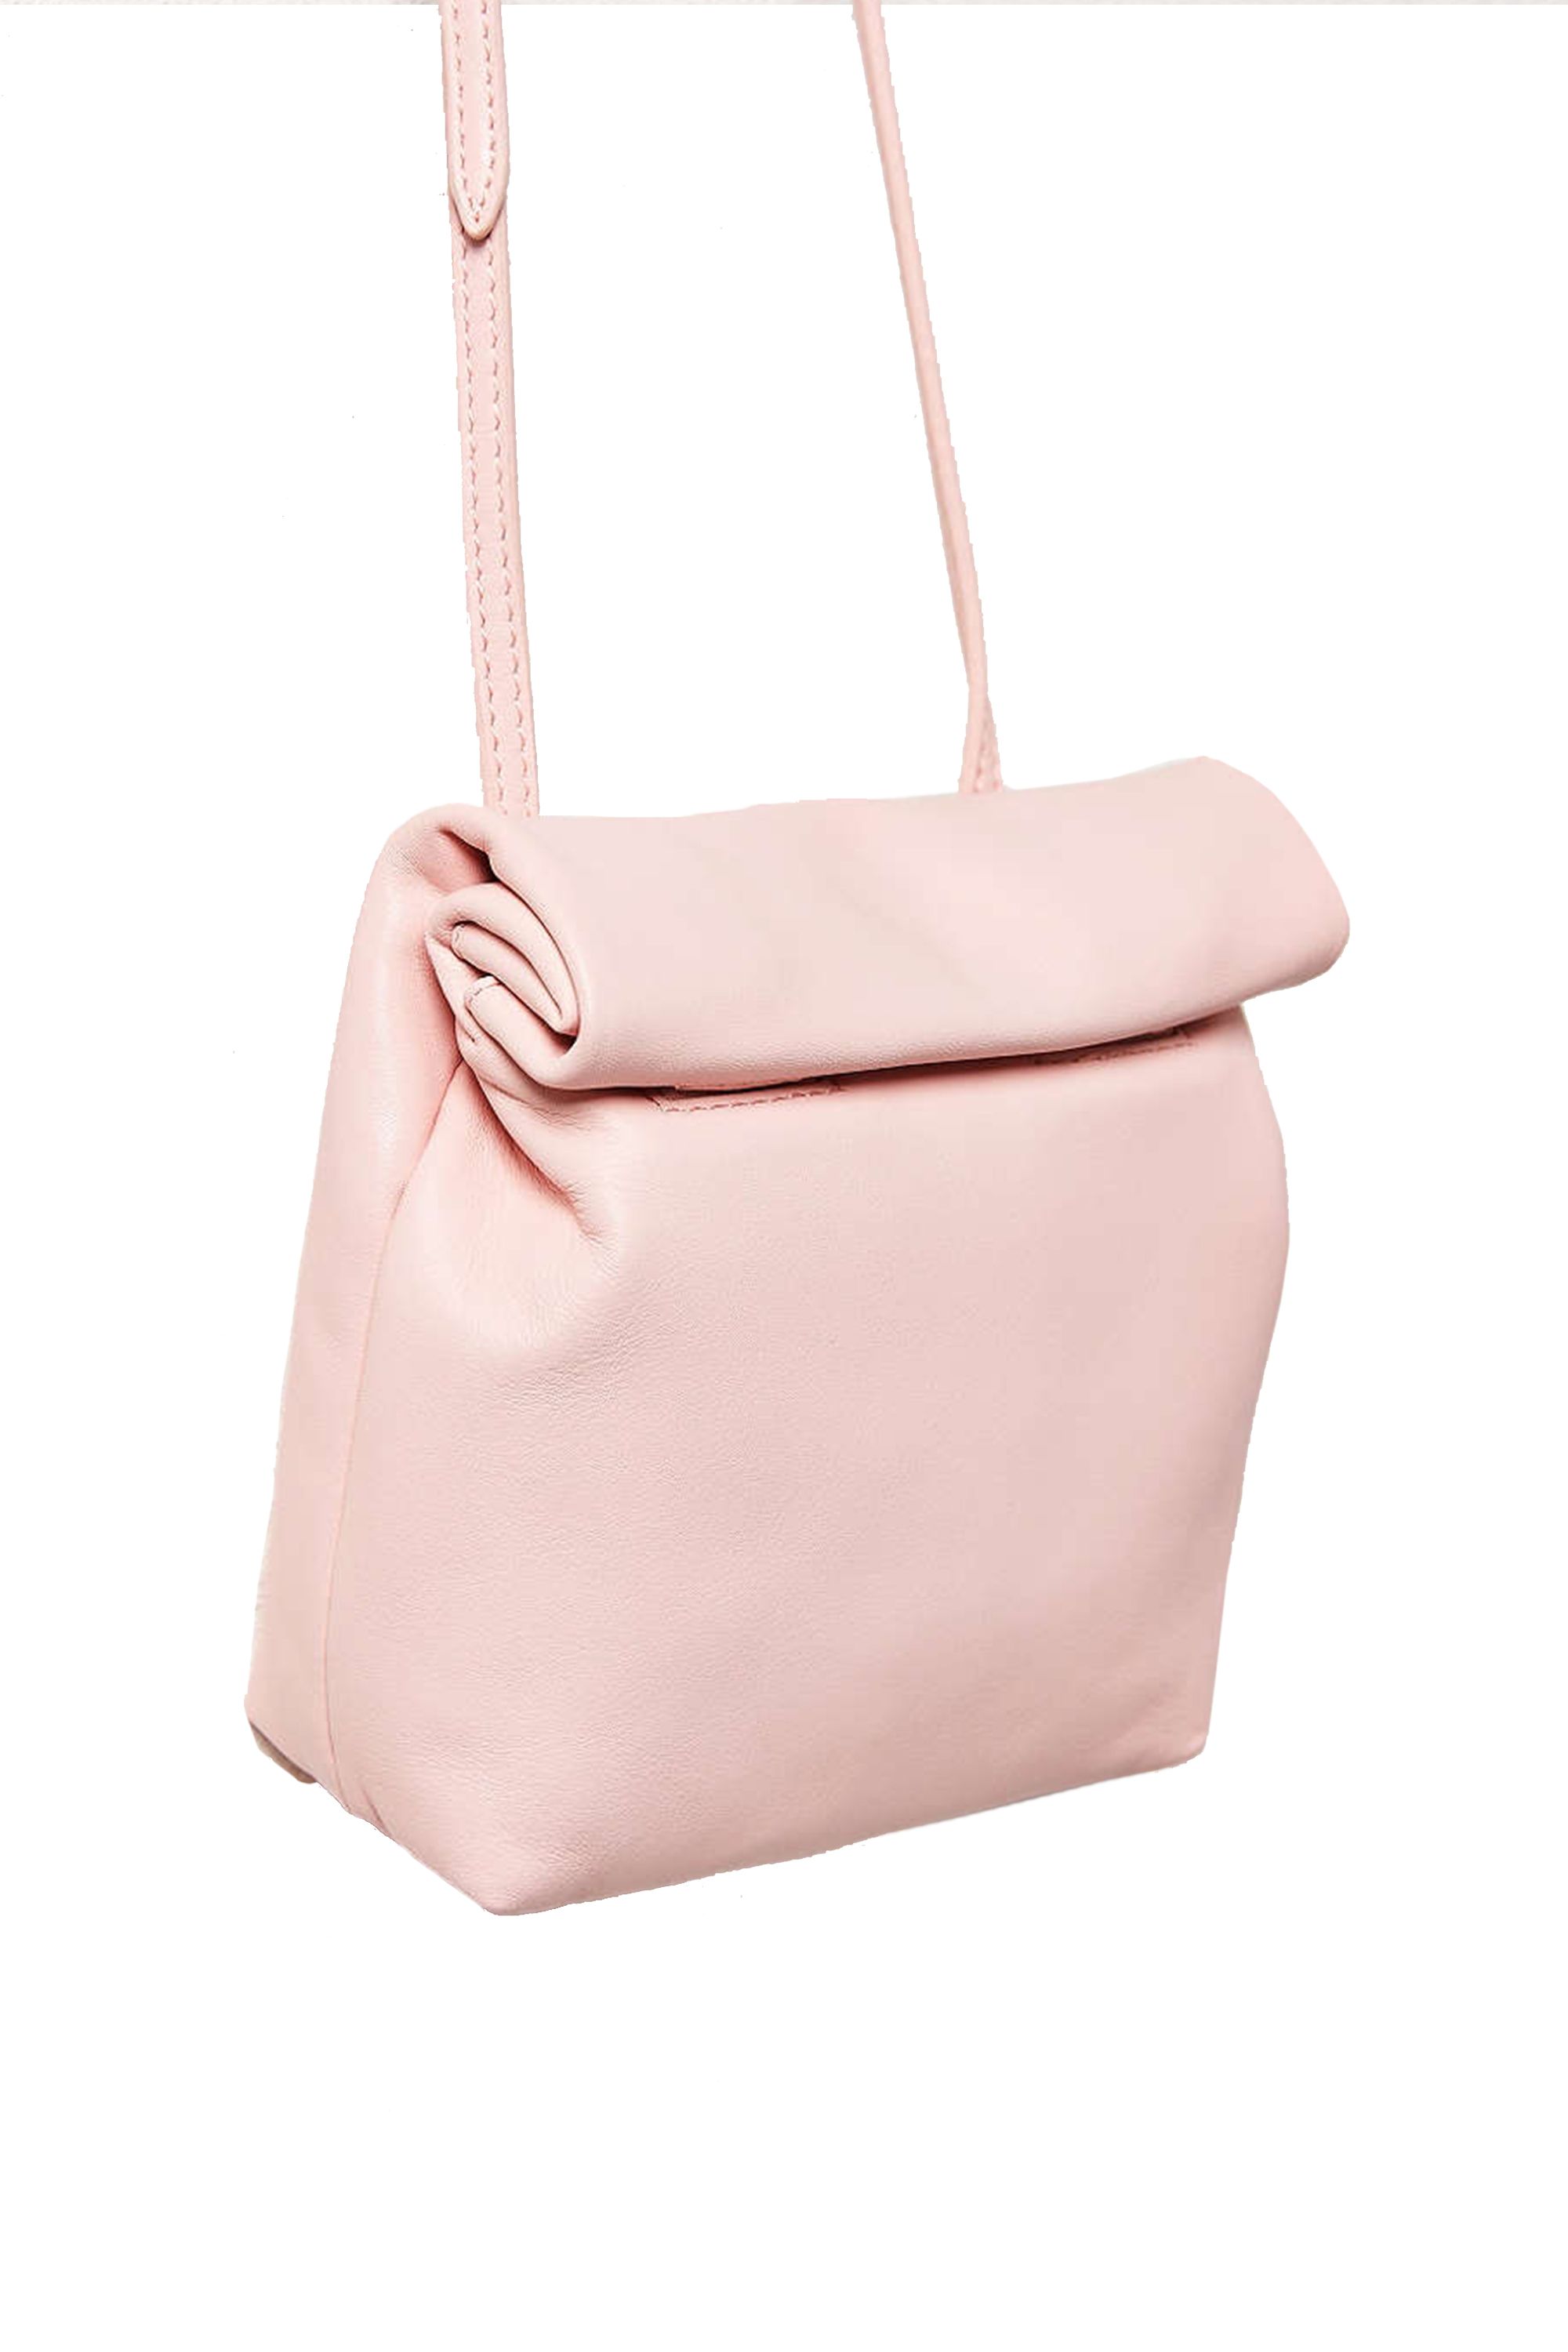 11 Pouch Bags That Will Make You Feel Fancy